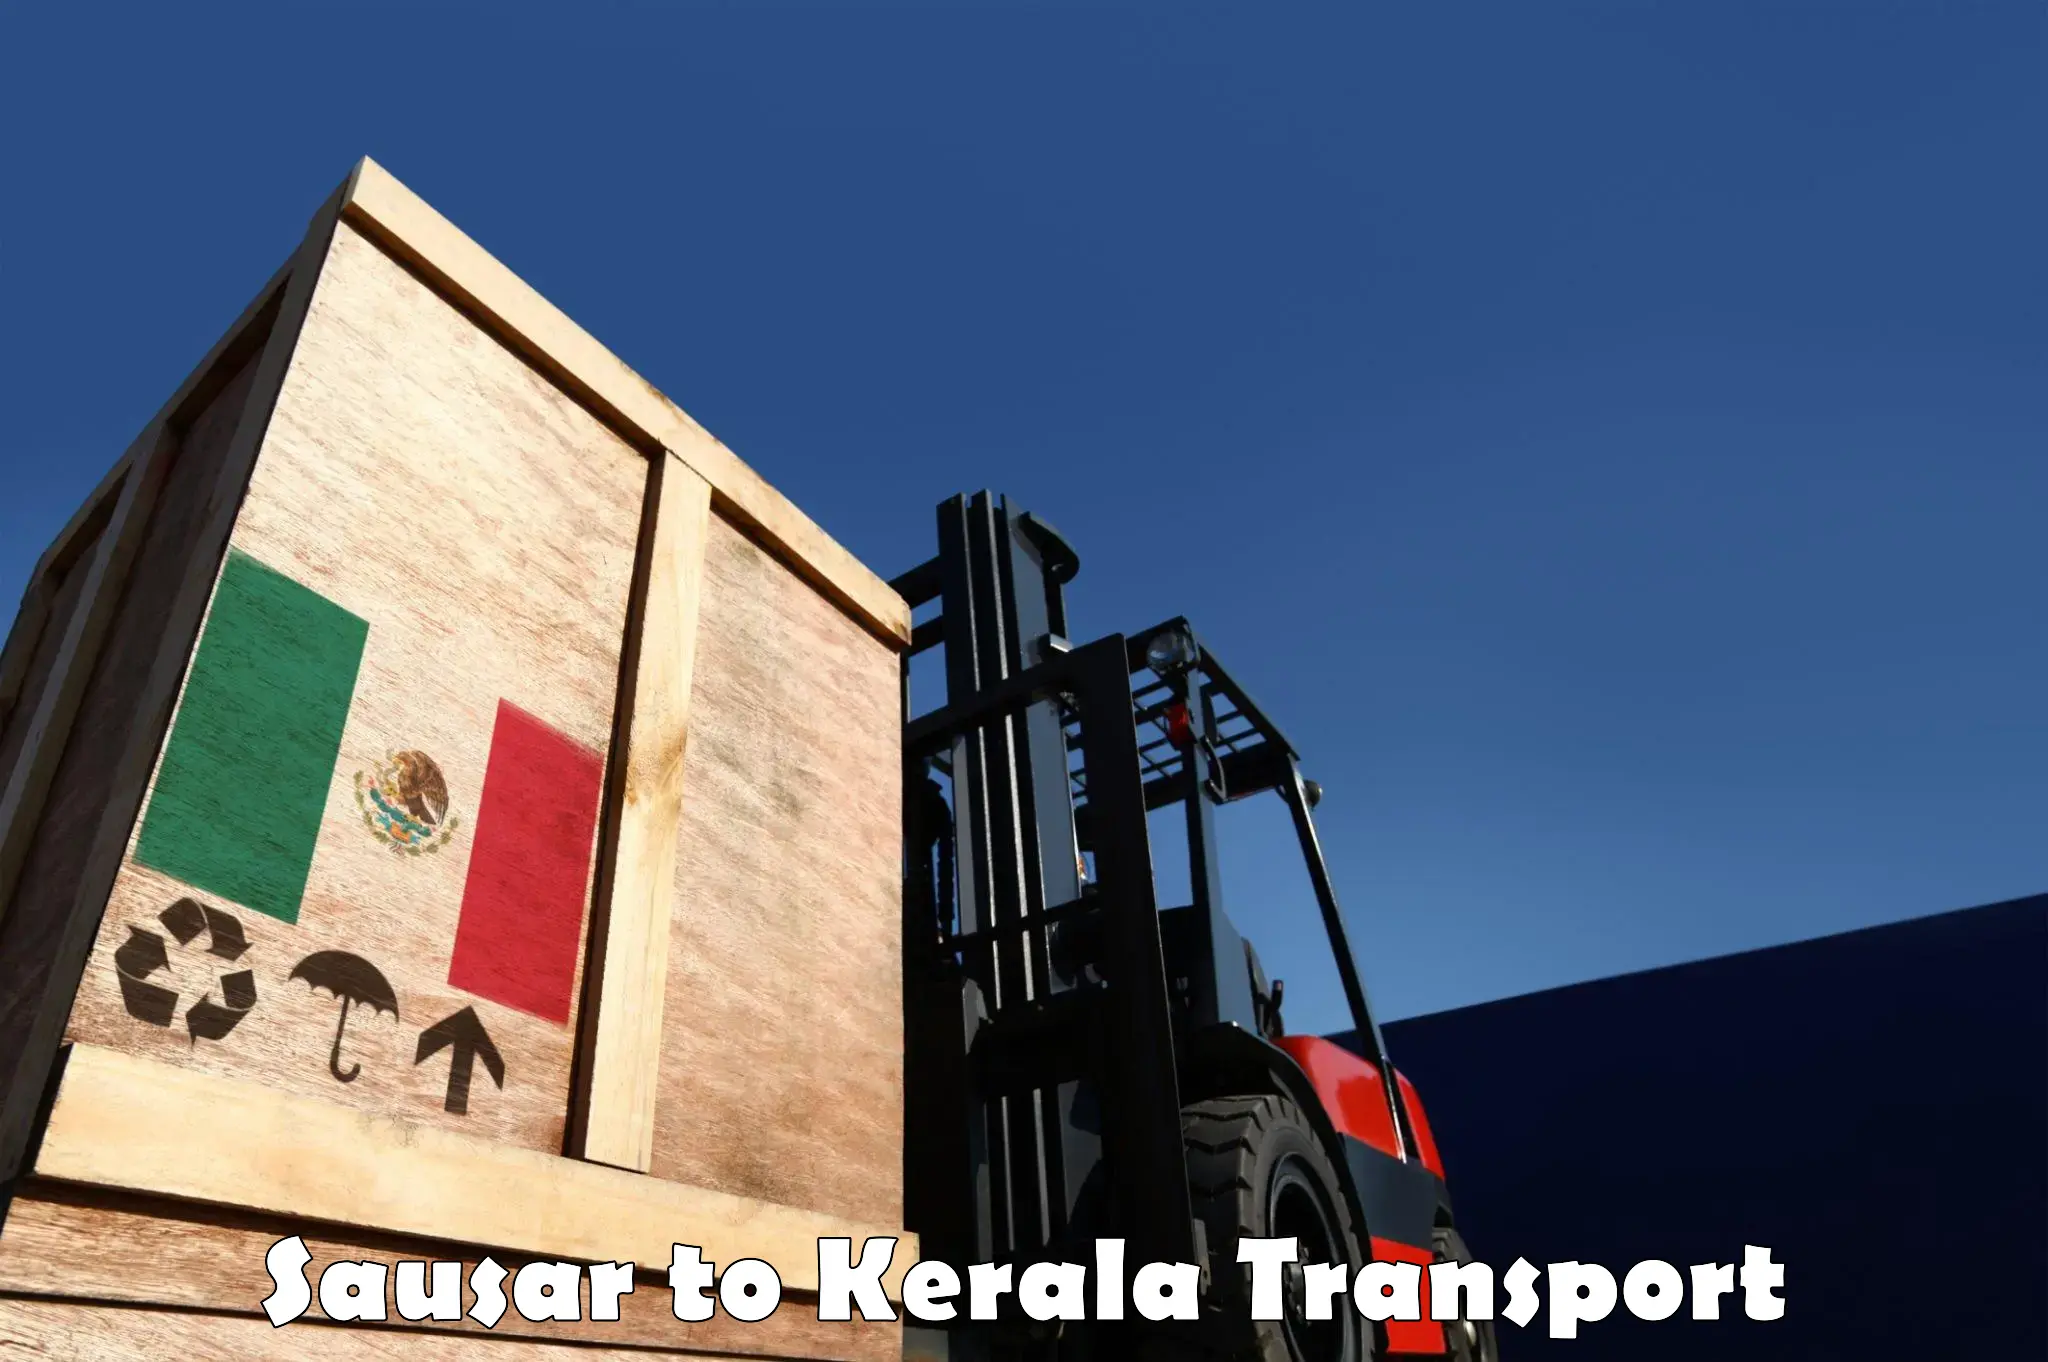 Daily transport service in Sausar to Kozhikode